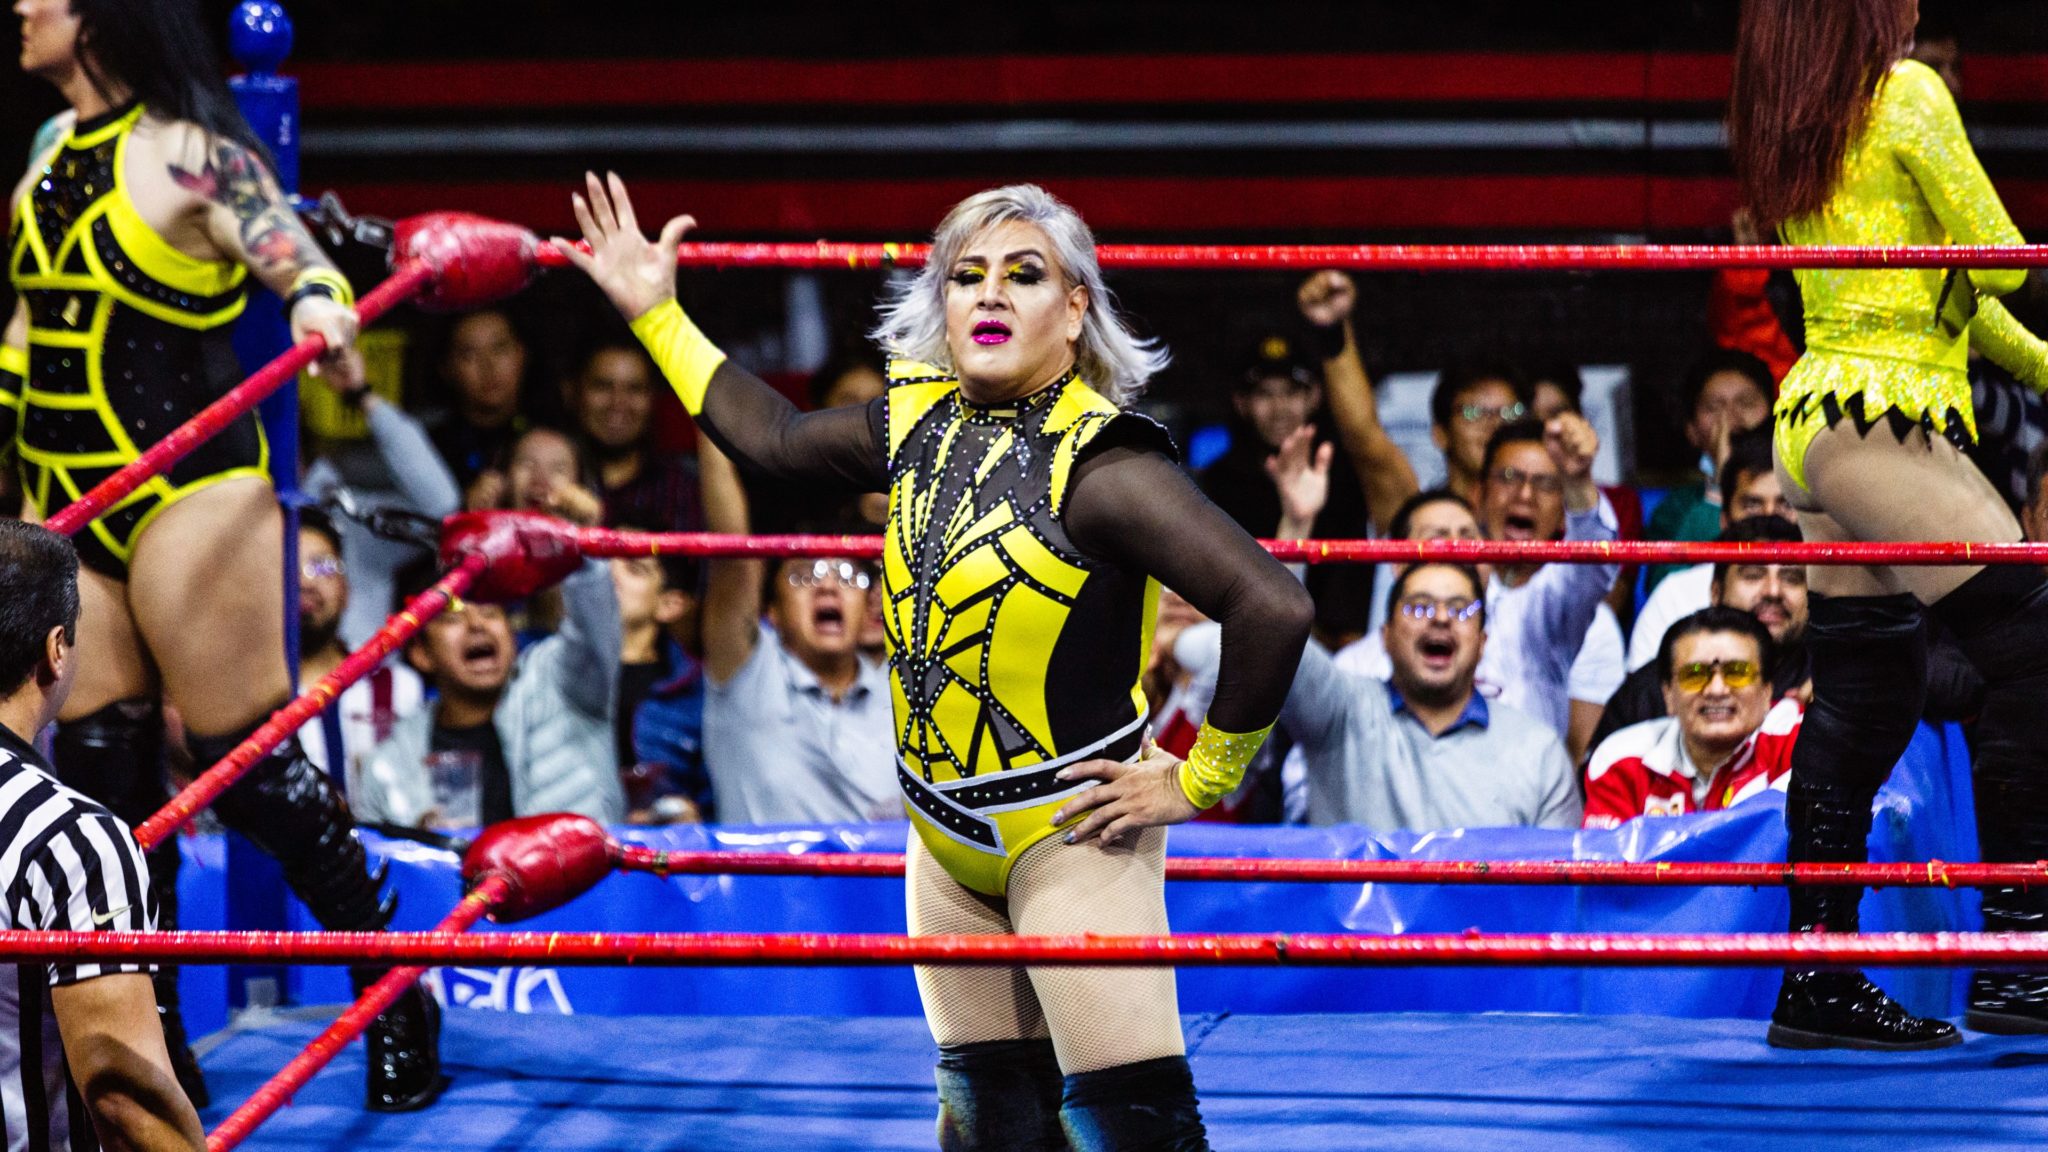 Diva Salvaje and the other members of Las Shotas face the audience at the Arena Naucalpan in Mexico State.